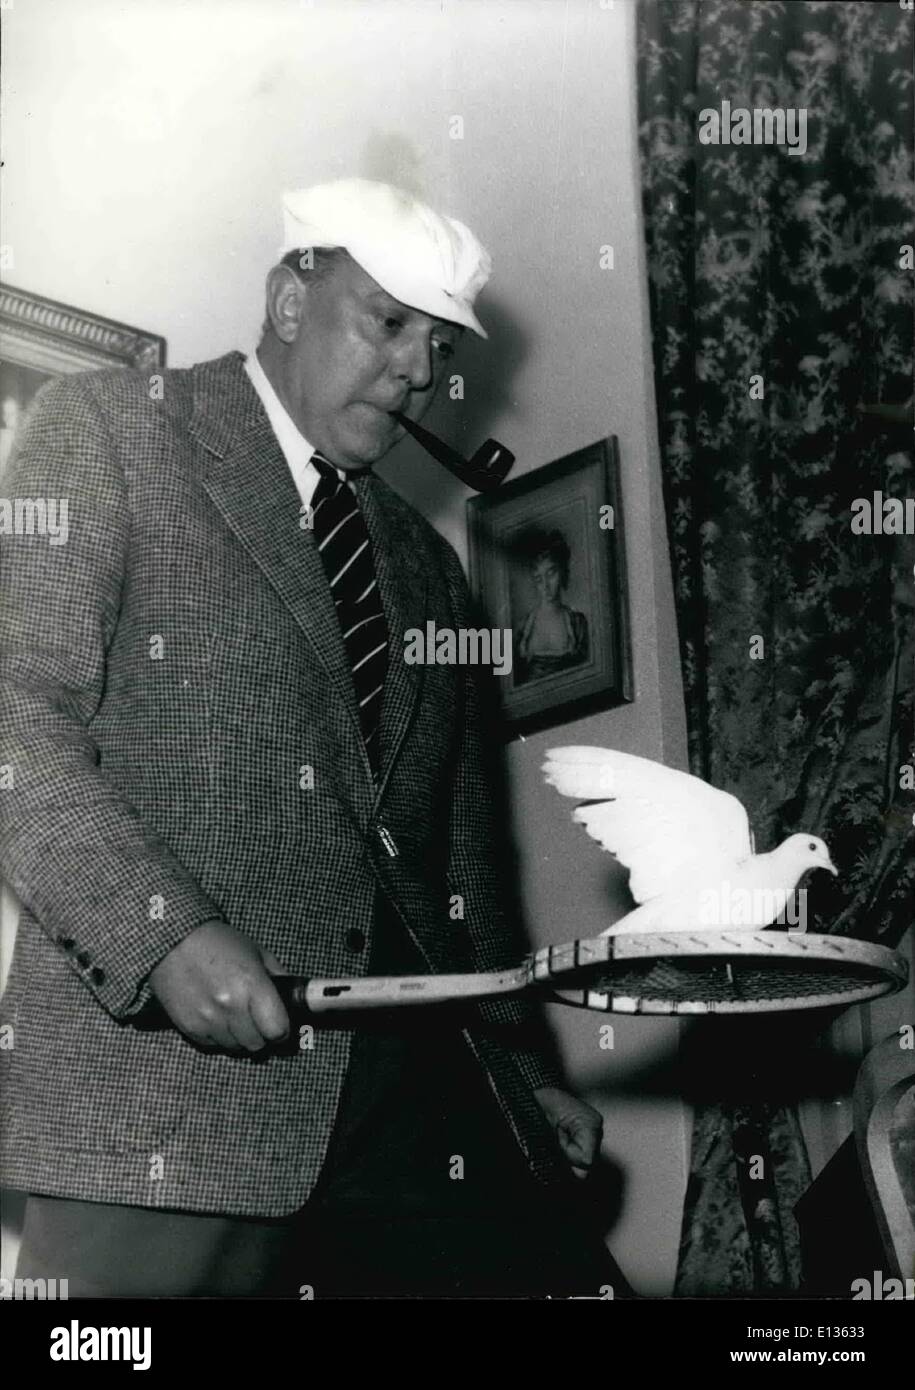 Feb. 28, 2012 - Tennis racket and dove to celebrate film producer's success. Jacques Tati, producer of the film Les Vacanes de M. Hulot (M. Hulot goes on holiday) has donned M. Hulot's white cap and brandishes a tennis racket on which the white dove (of Lassere's restaurant) seems quite at ease. Jacques Tati was awarded the Prix Louis-Delluc by a jury of cinema writers and reporters for his film during a luncheon held at Lassere's. Dec. 12/53 Stock Photo